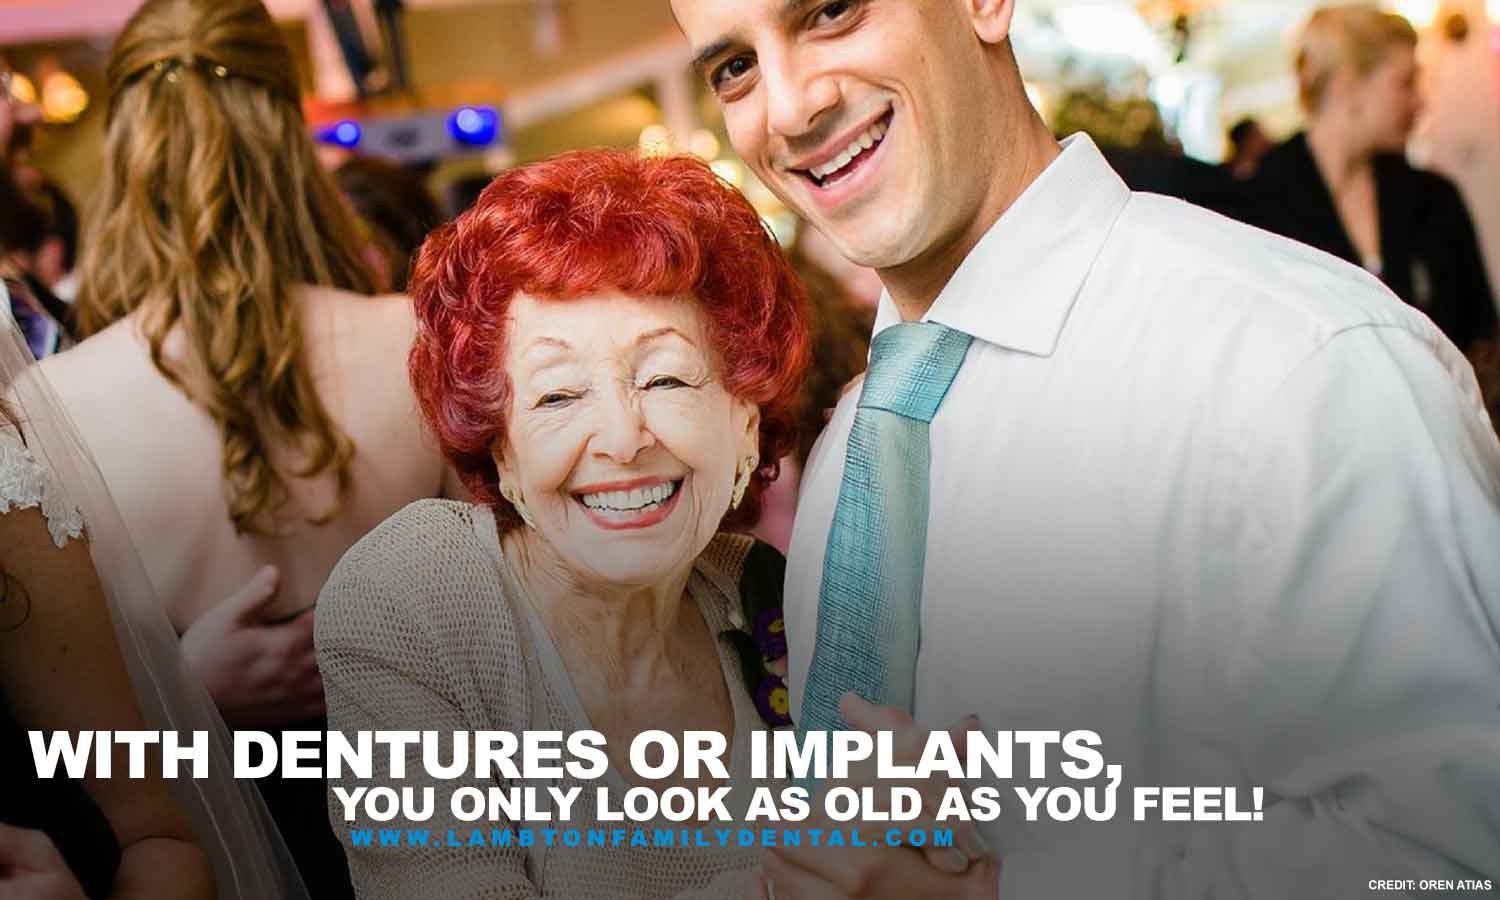 With dentures or implants